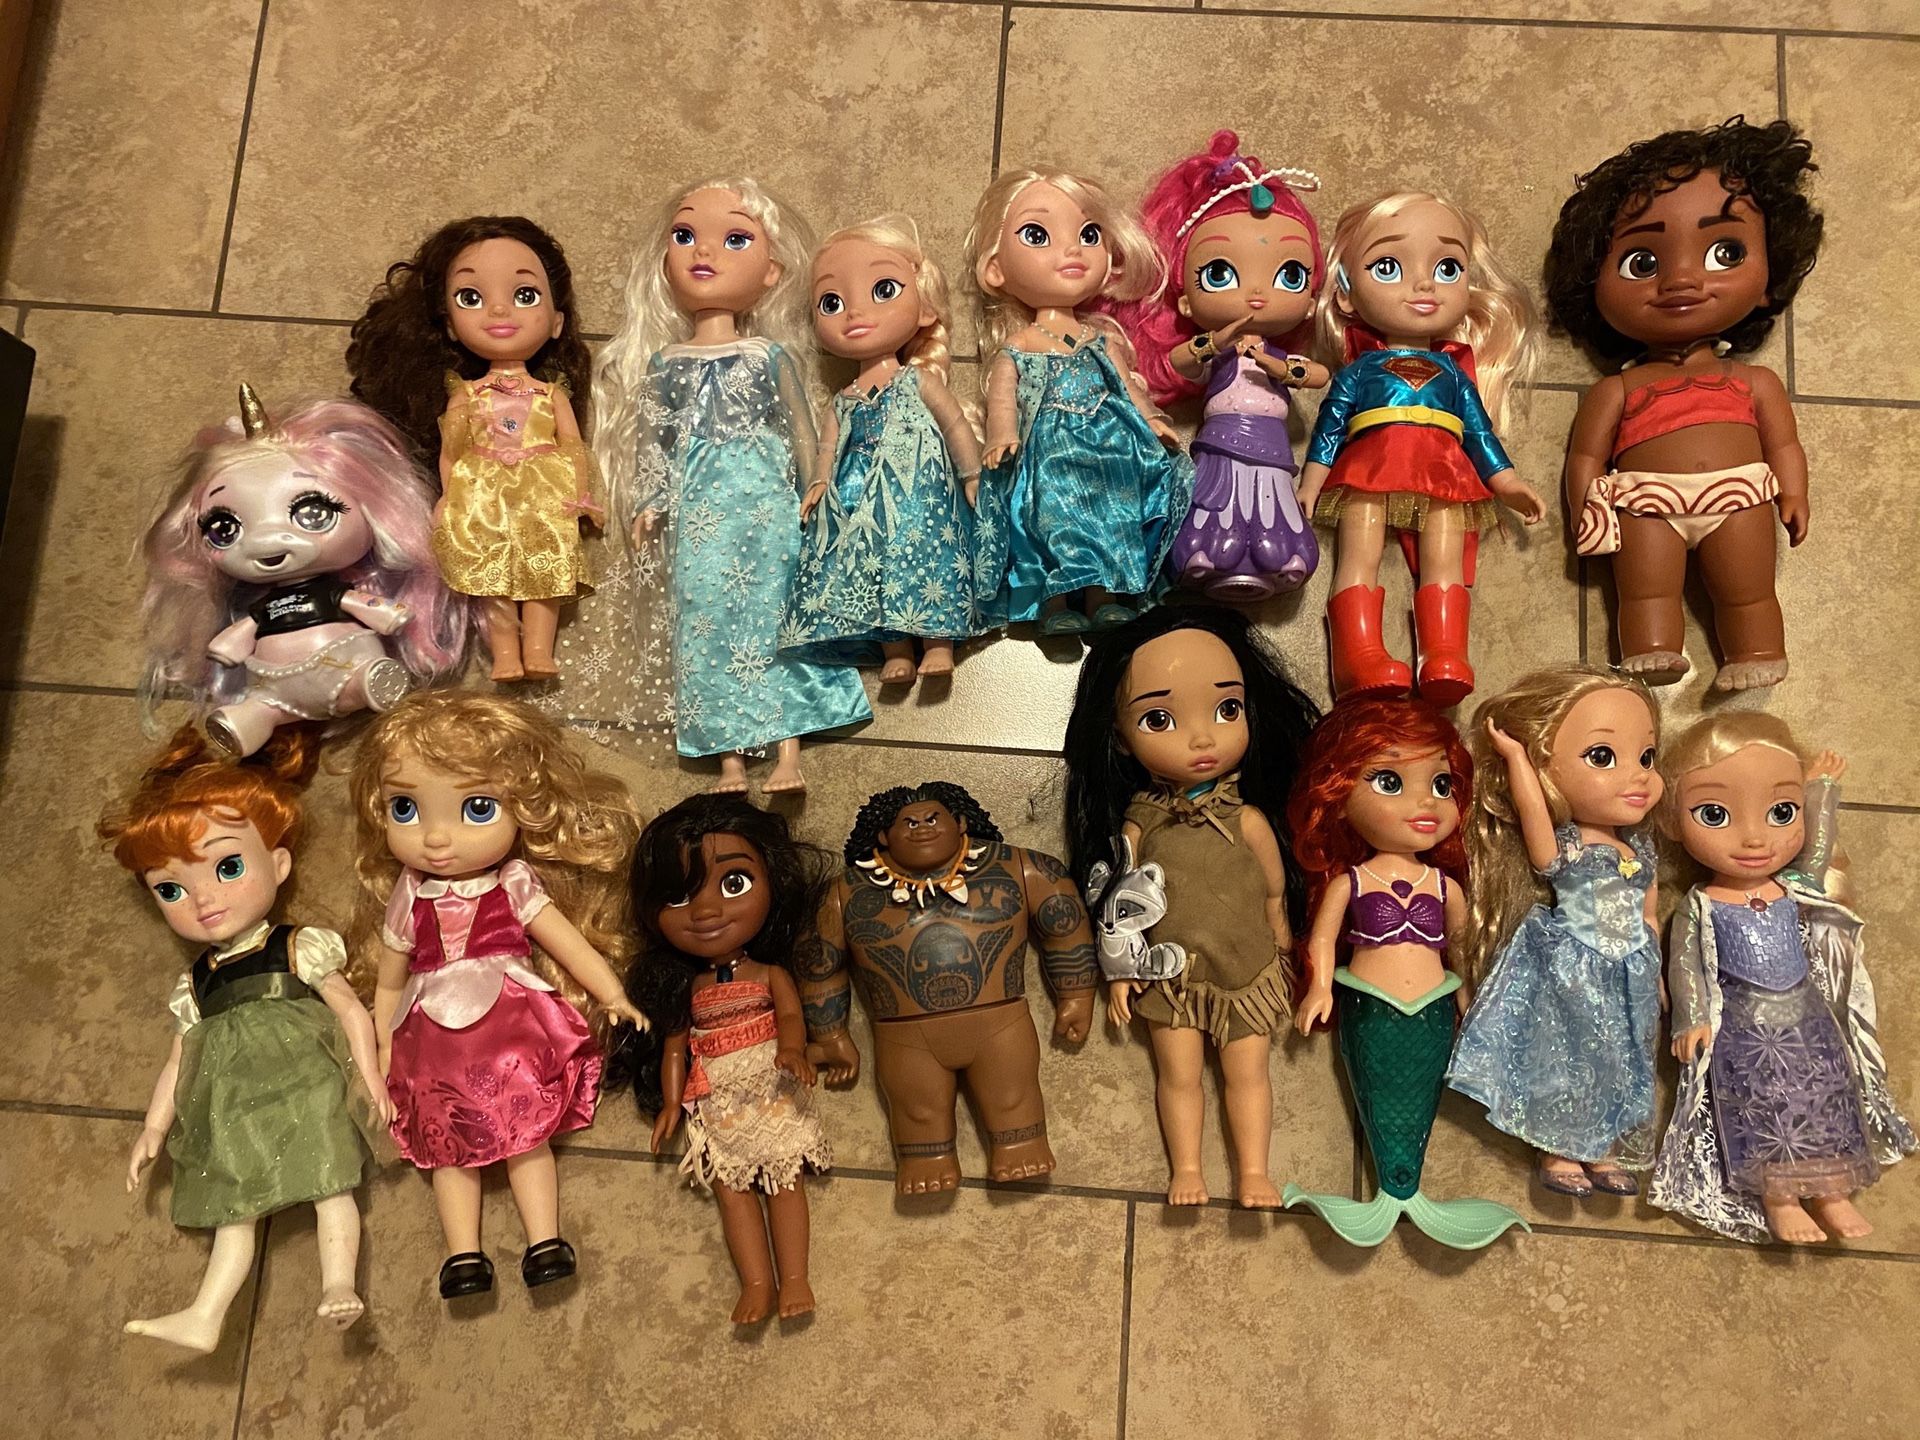 Disney princess dolls ( each $5 or whole package $50)